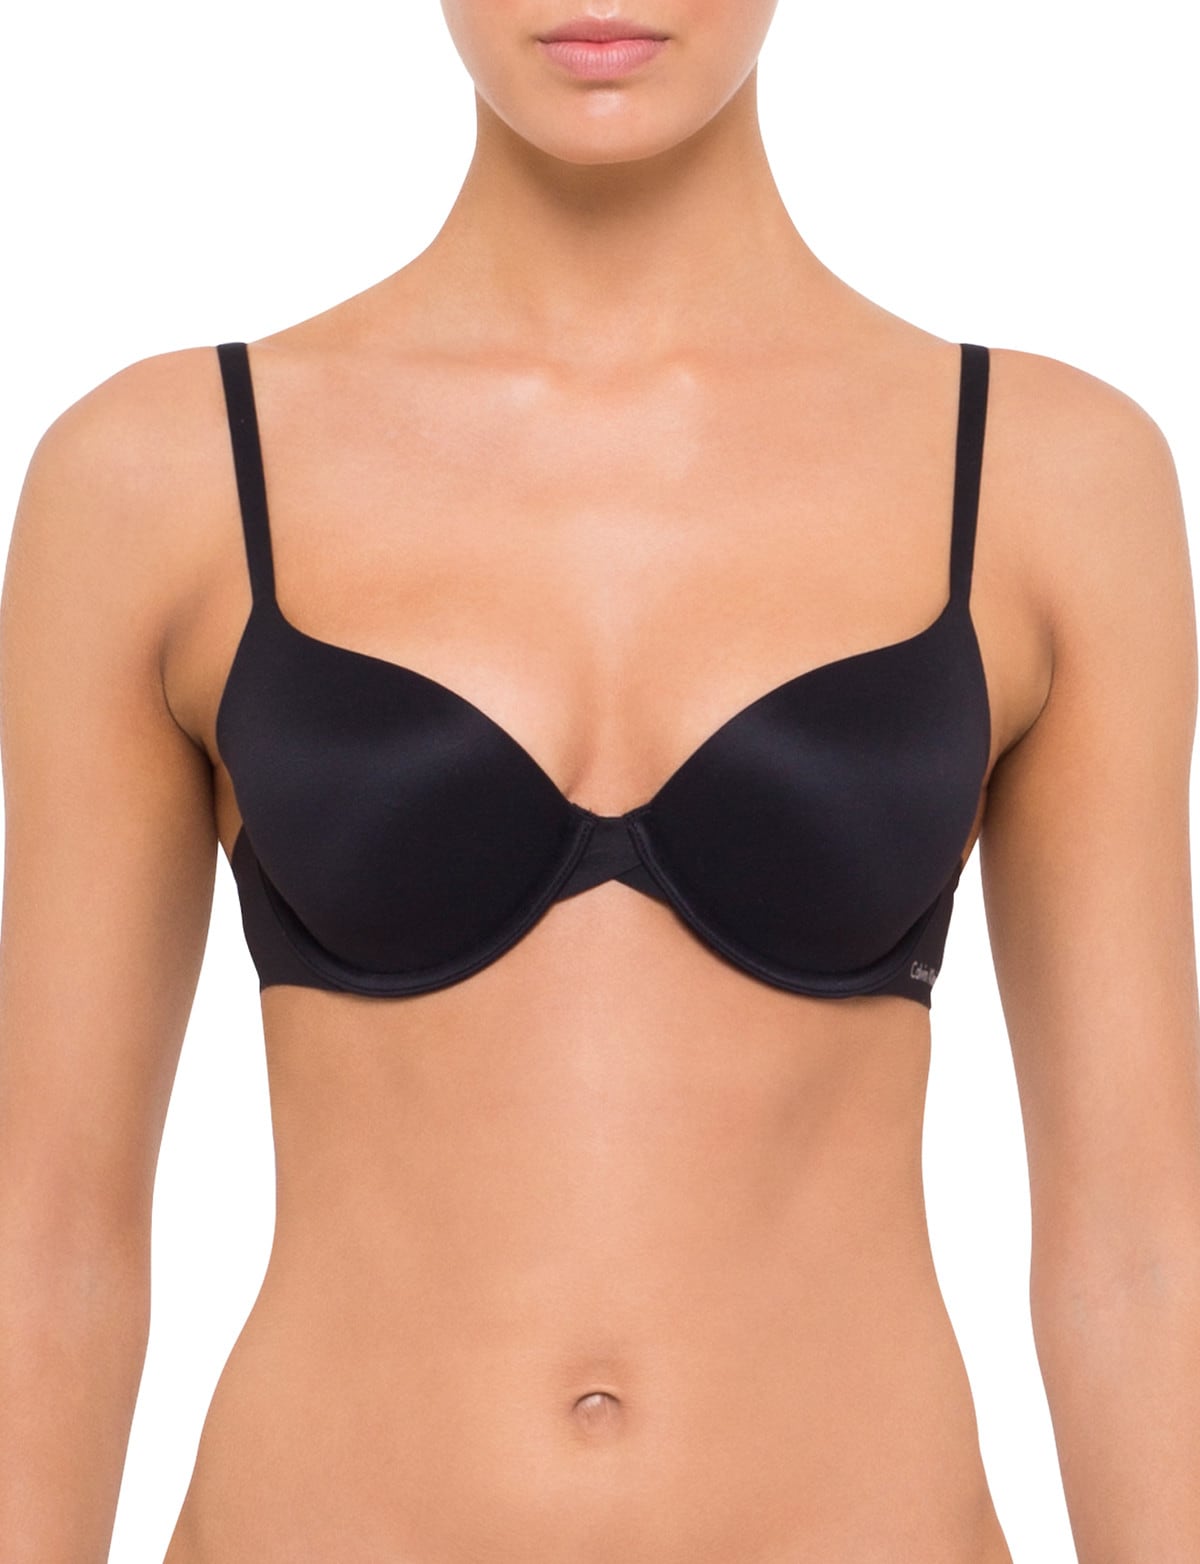 Calvin Klein - Perfectly Fit T-shirt Bra in Black